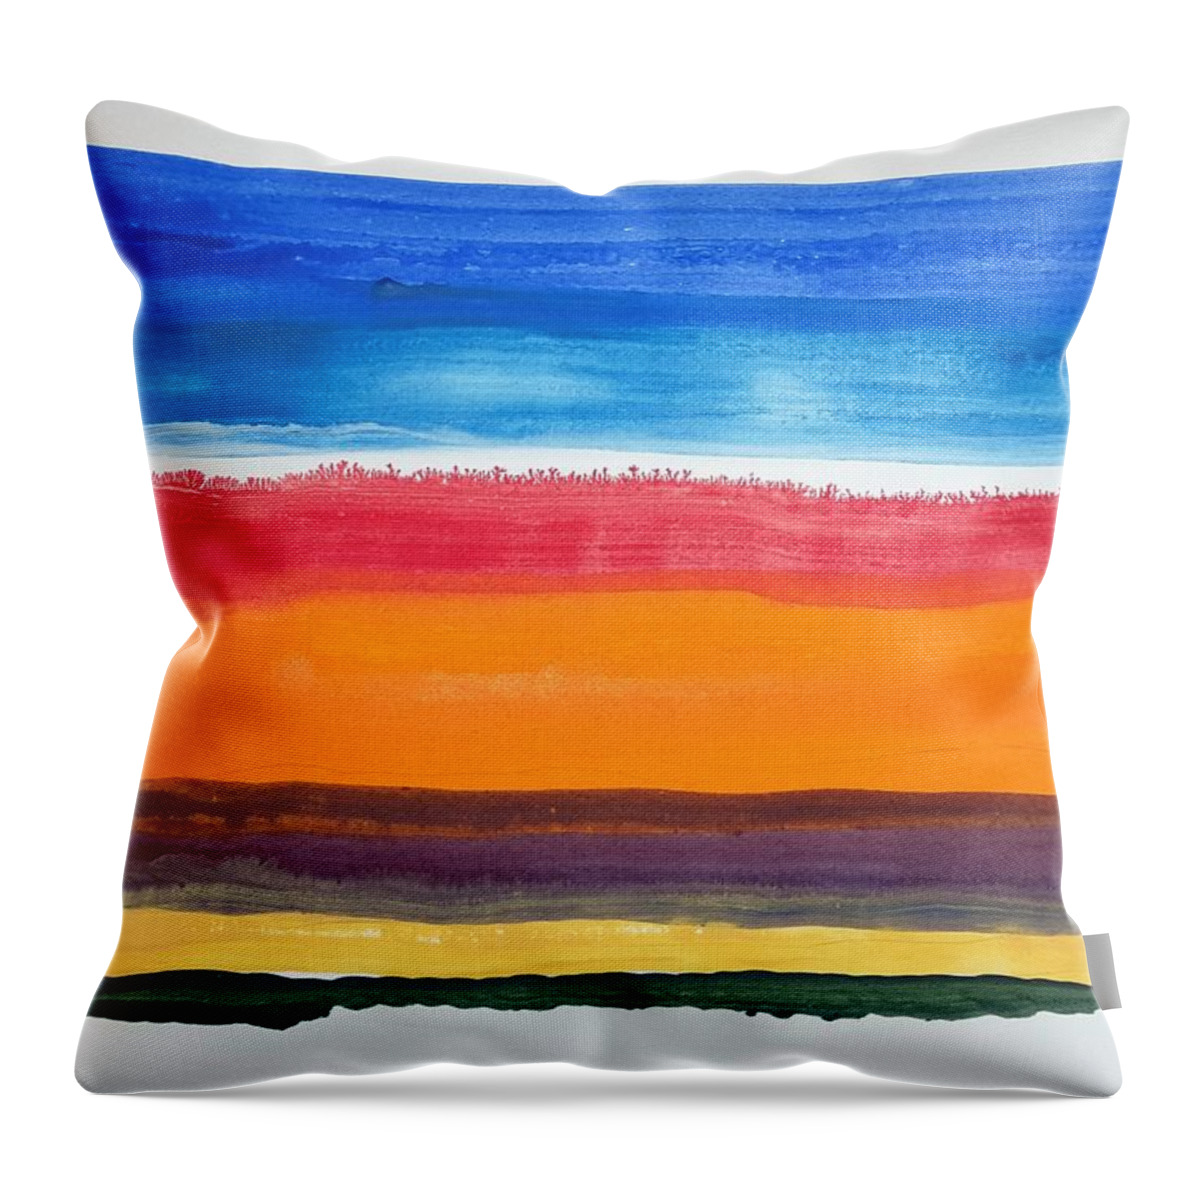 Watercolor Throw Pillow featuring the painting Portland Light by John Klobucher